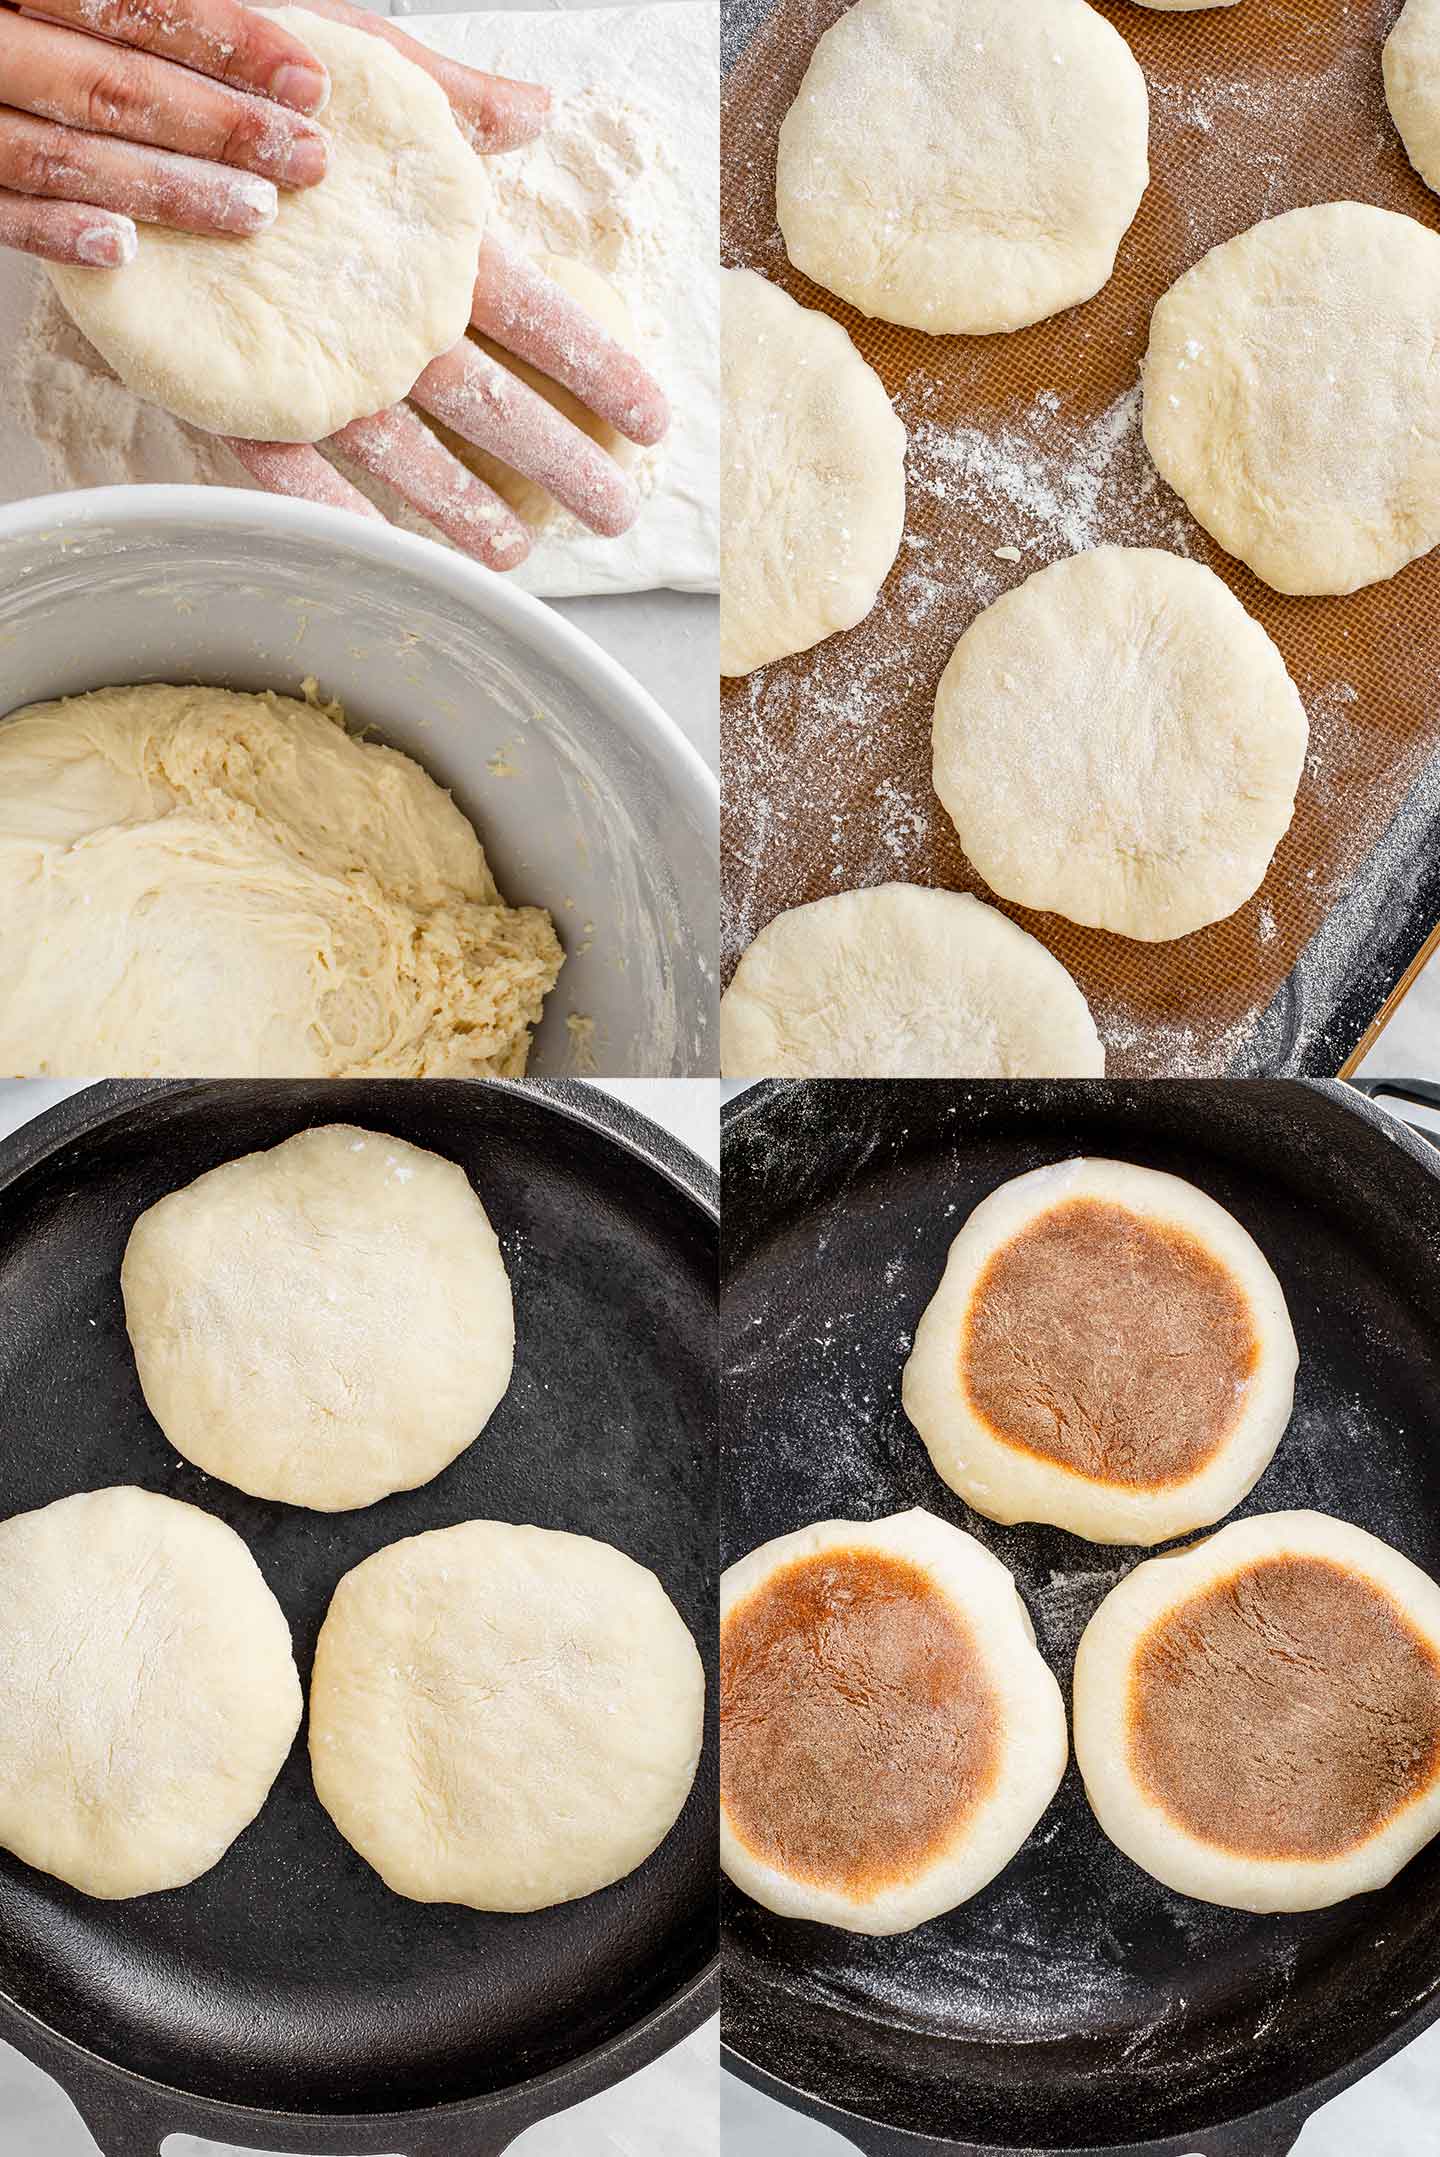 Top down view of a grid of four process photos. The small dough balls are flattened into circles between the palms of two hands, allowed to rest on a baking tray, then cooked on a skillet, and flipped showing the dark golden and cooked bottoms.